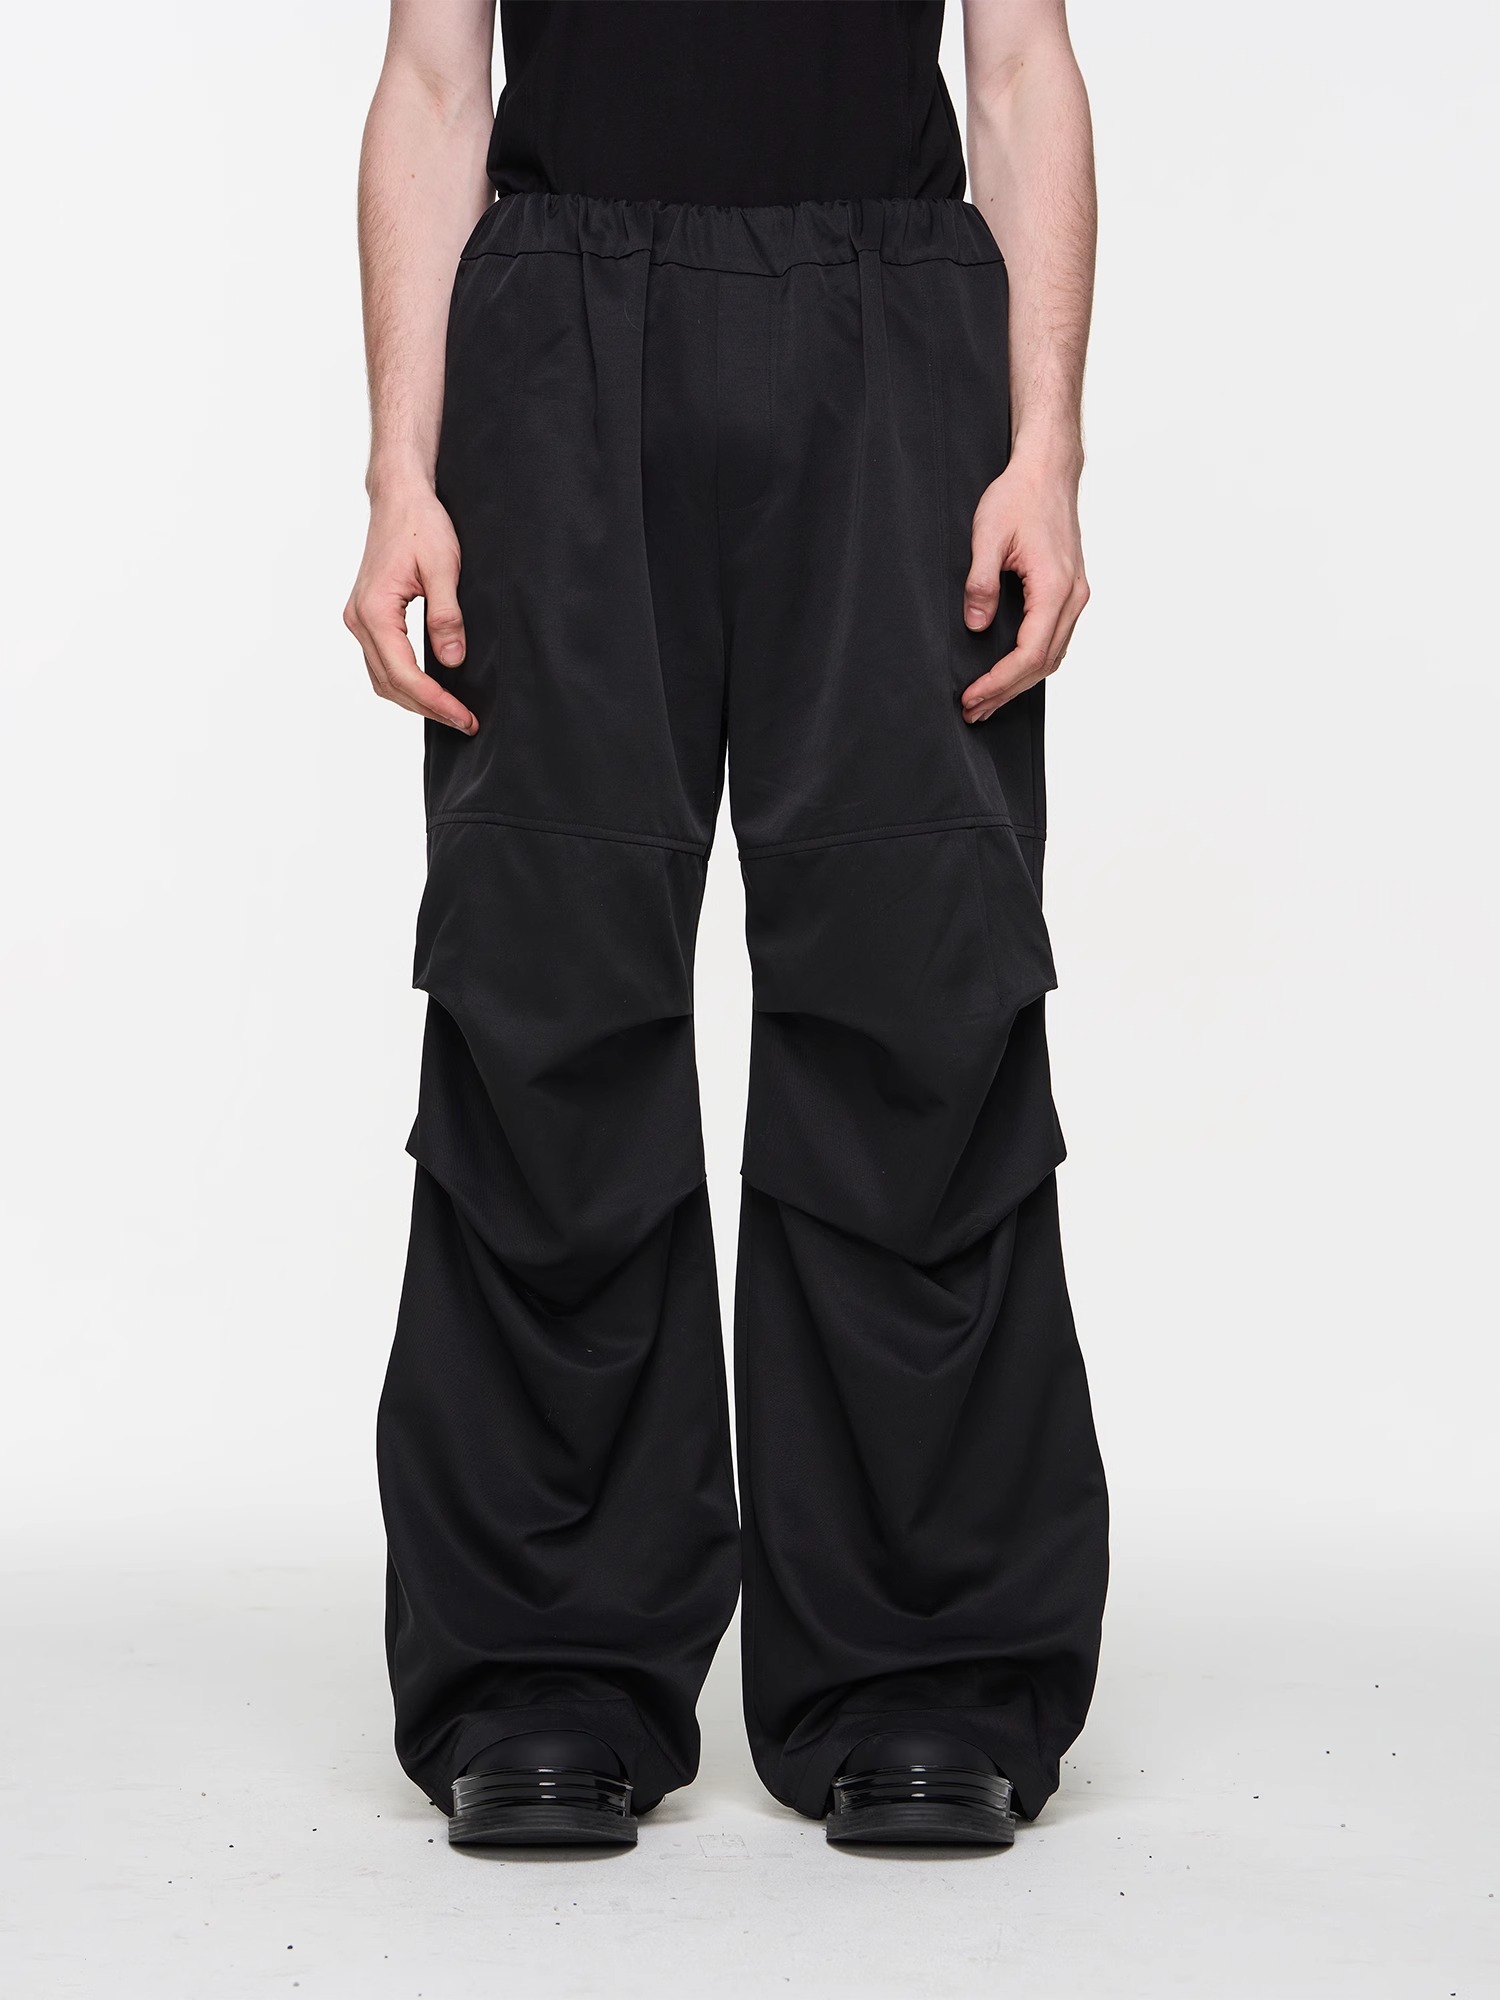 BLINDNOPLAN 24SS Pleated Structured Elastic Waist Casual Pants